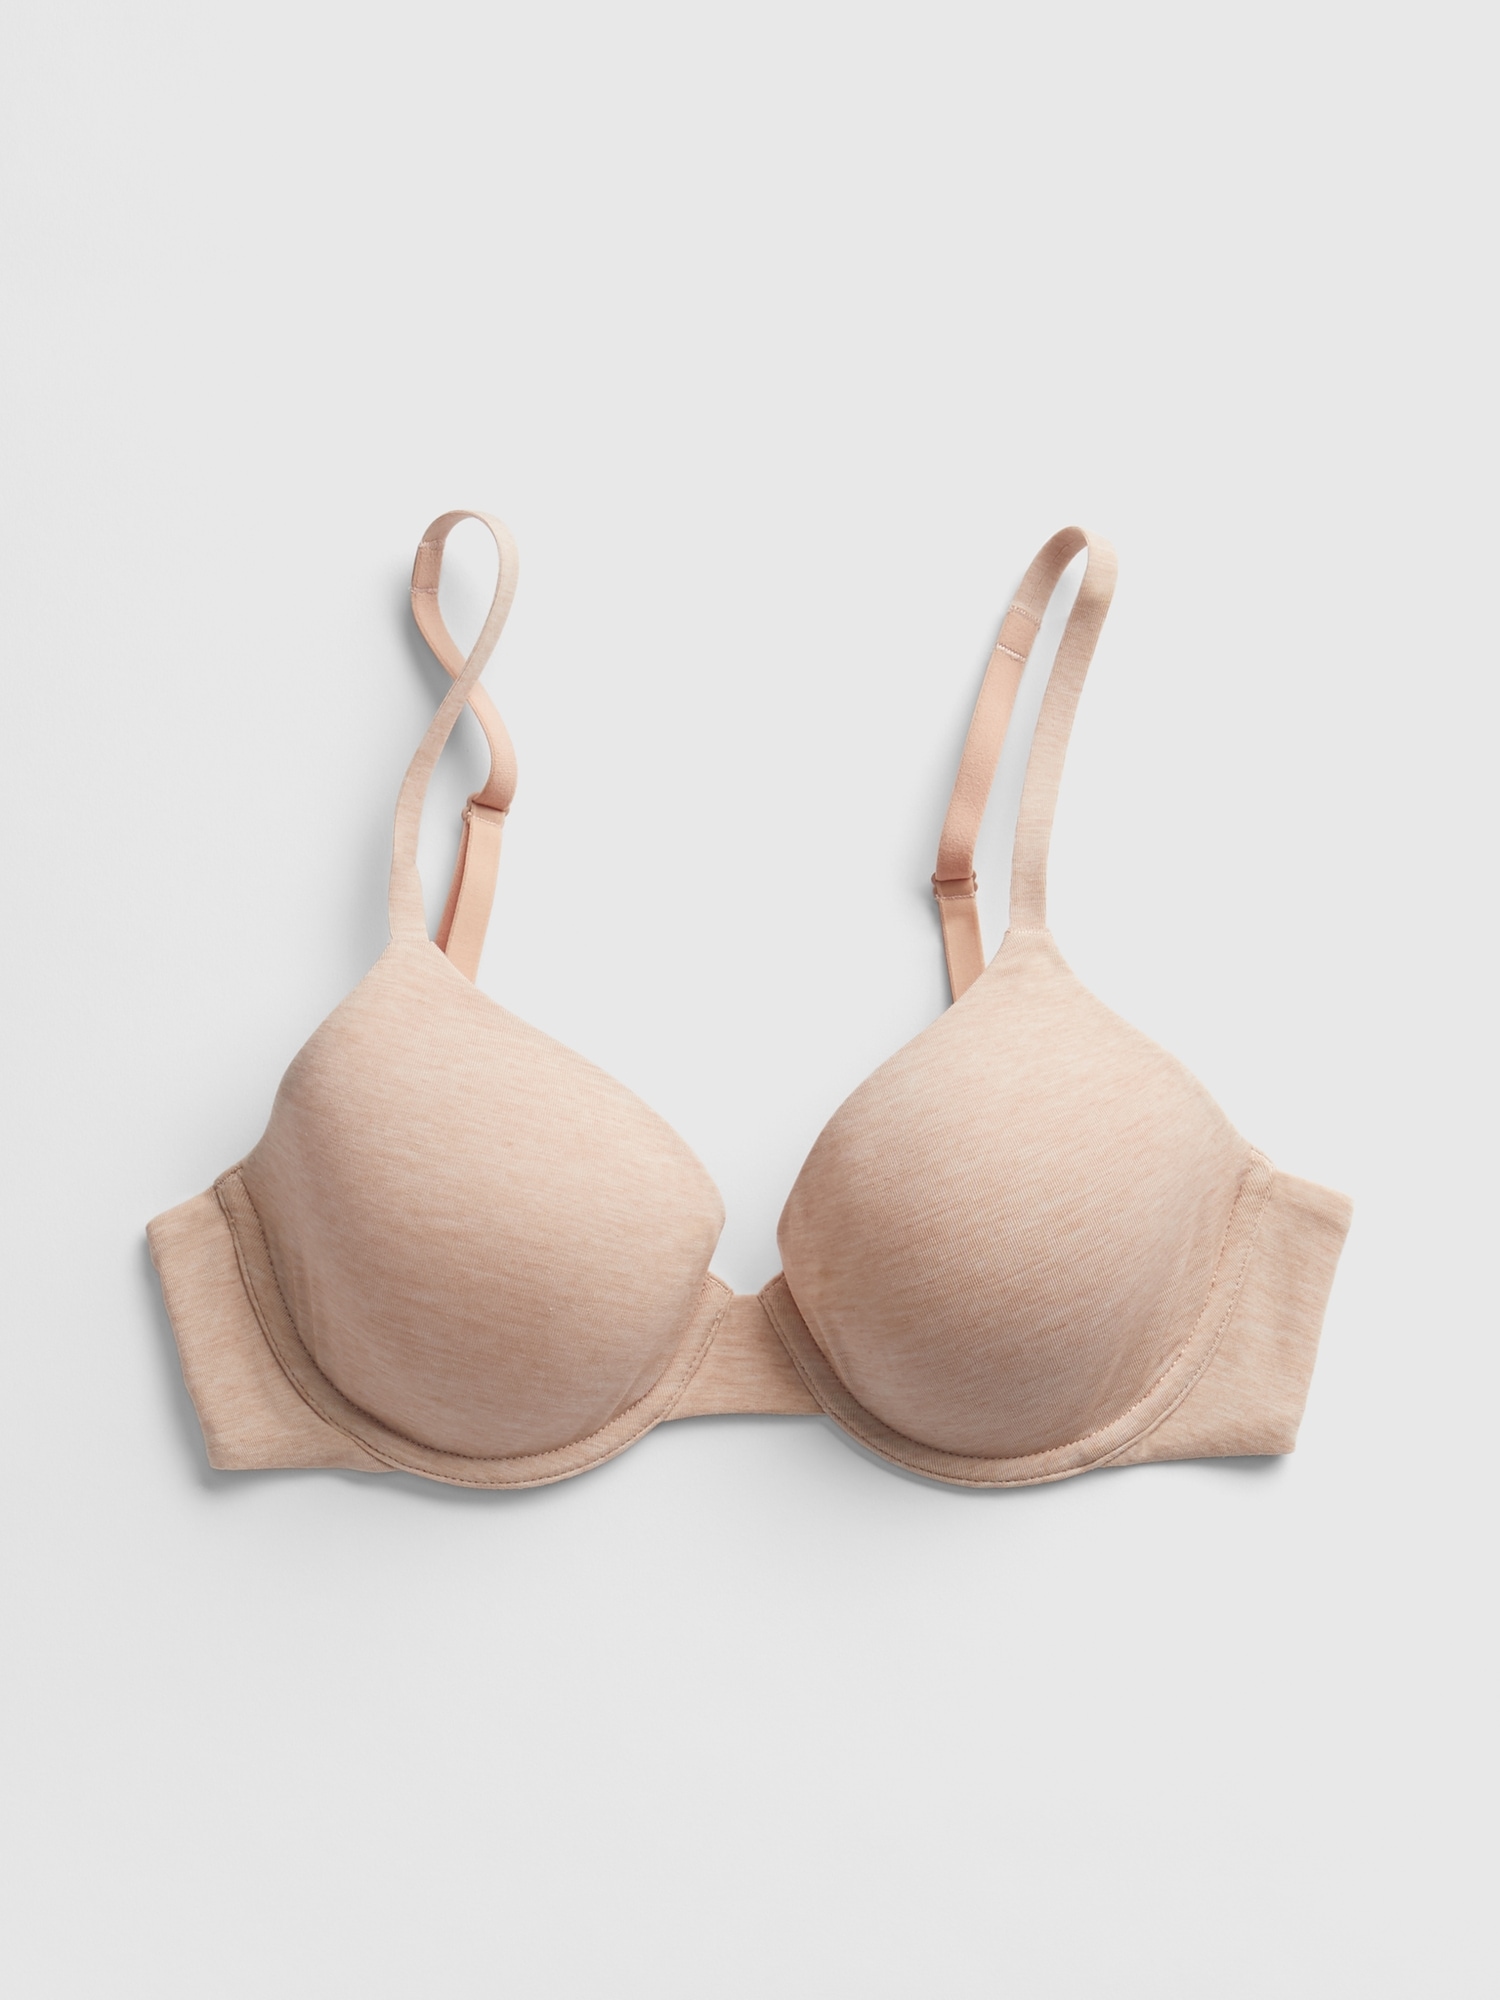 Shop Set of 2 - Textured Mesh Push-Up Bra with Hook and Eye Closure Online